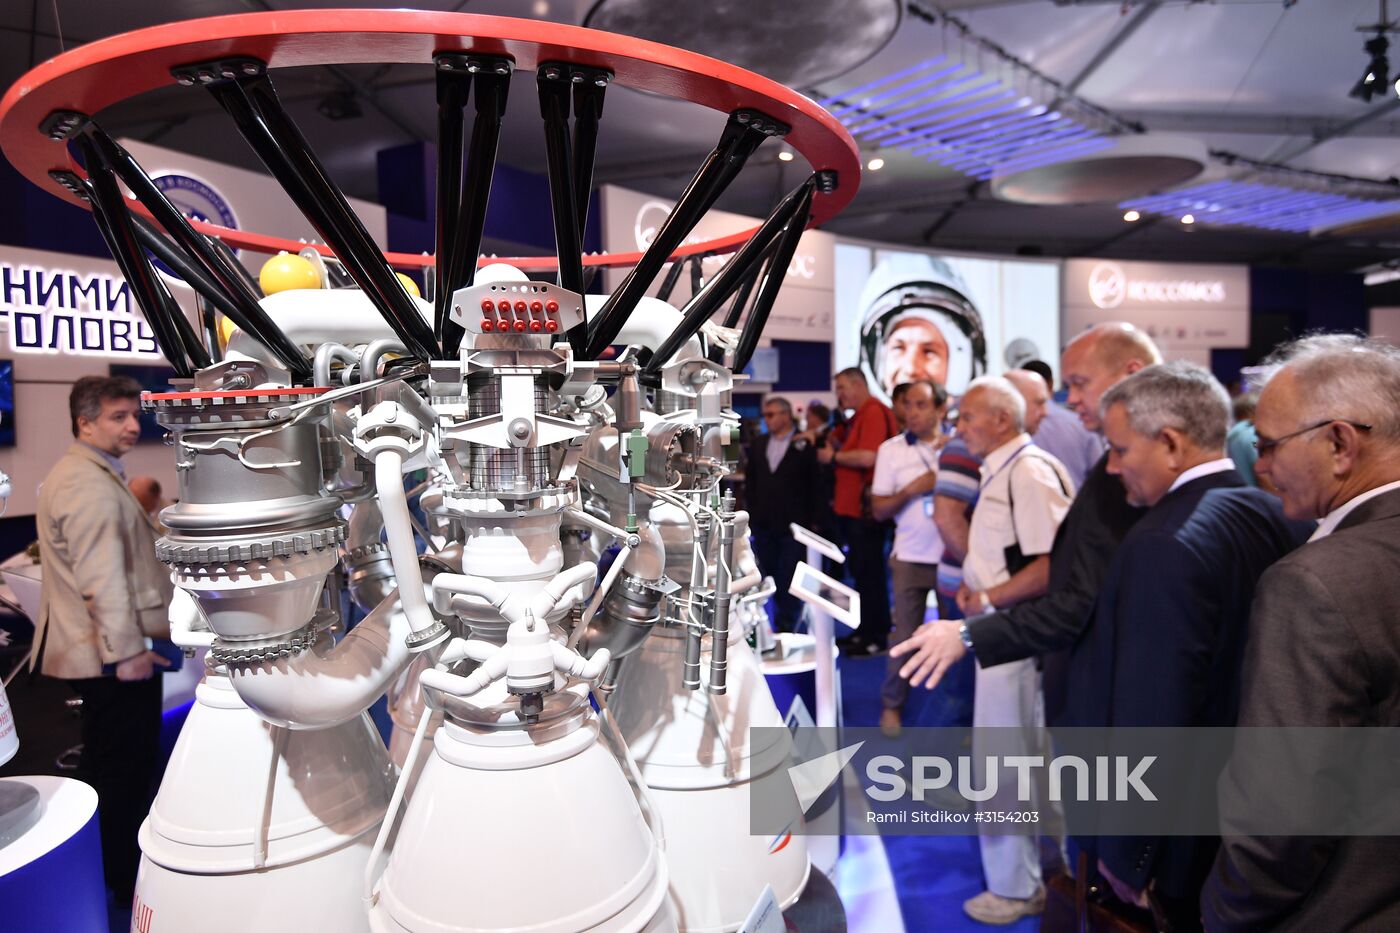 International Aviation and Space Salon MAKS-2017. Day two